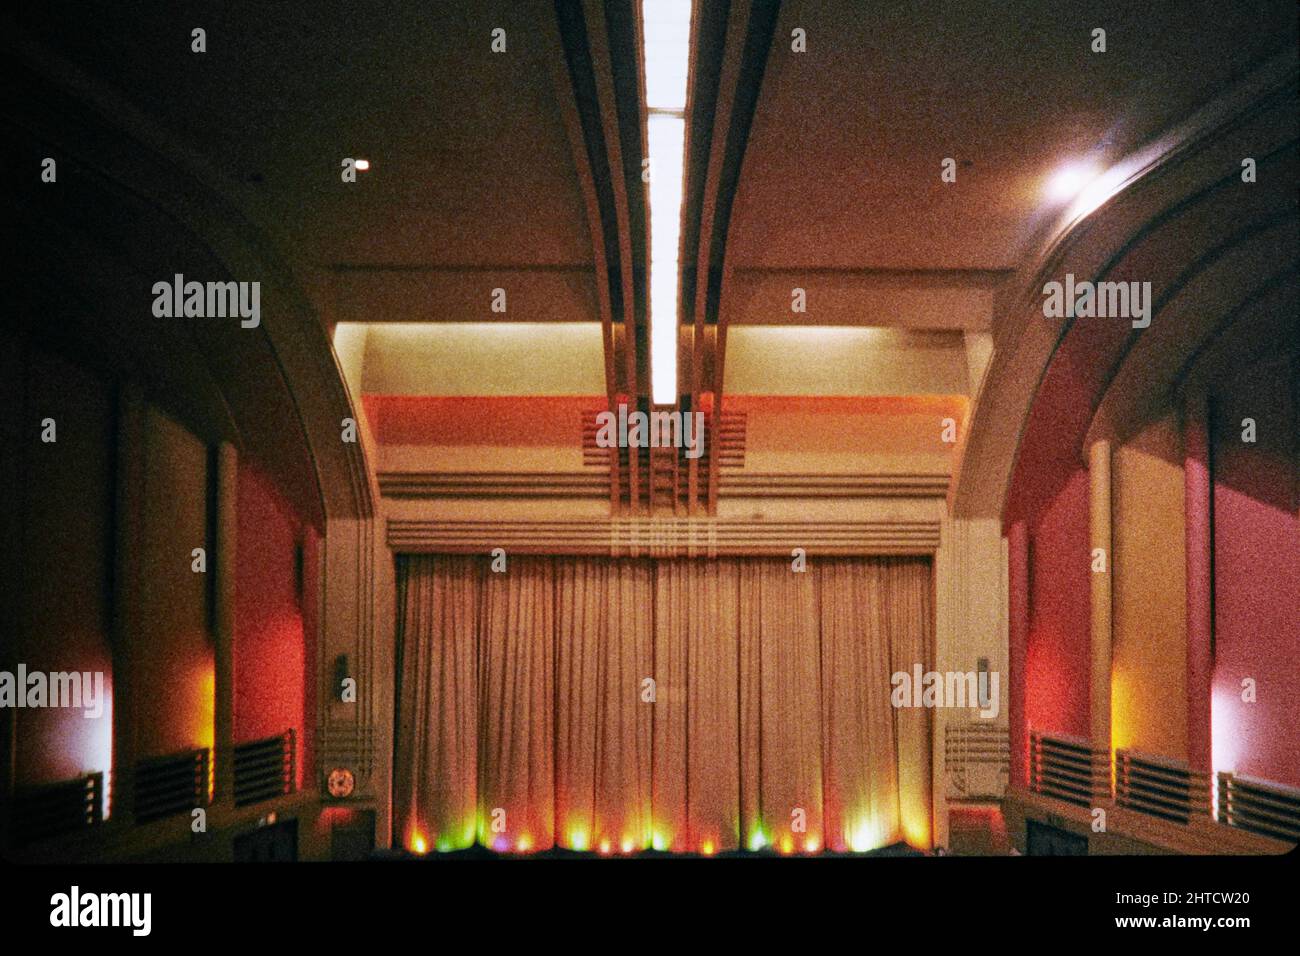 Odeon Cinema, Fortis Green Road, Muswell Hill, Haringey, London, 1974-1999 The central strip laylight and curved ceiling and front of the auditorium in the Odeon Cinema, viewed from the front centre of the circle. The Odeon Cinema opened in 1936. The exterior design of the building was restricted and subdued due to opposition from the church located opposite; the interior was therefore designed to compensate. The auditorium is described as being &quot;the most elaborate interior of any Odeon cinema to survive&quot;. The central laylight, which runs down the centre of the ceiling towards the cu Stock Photo